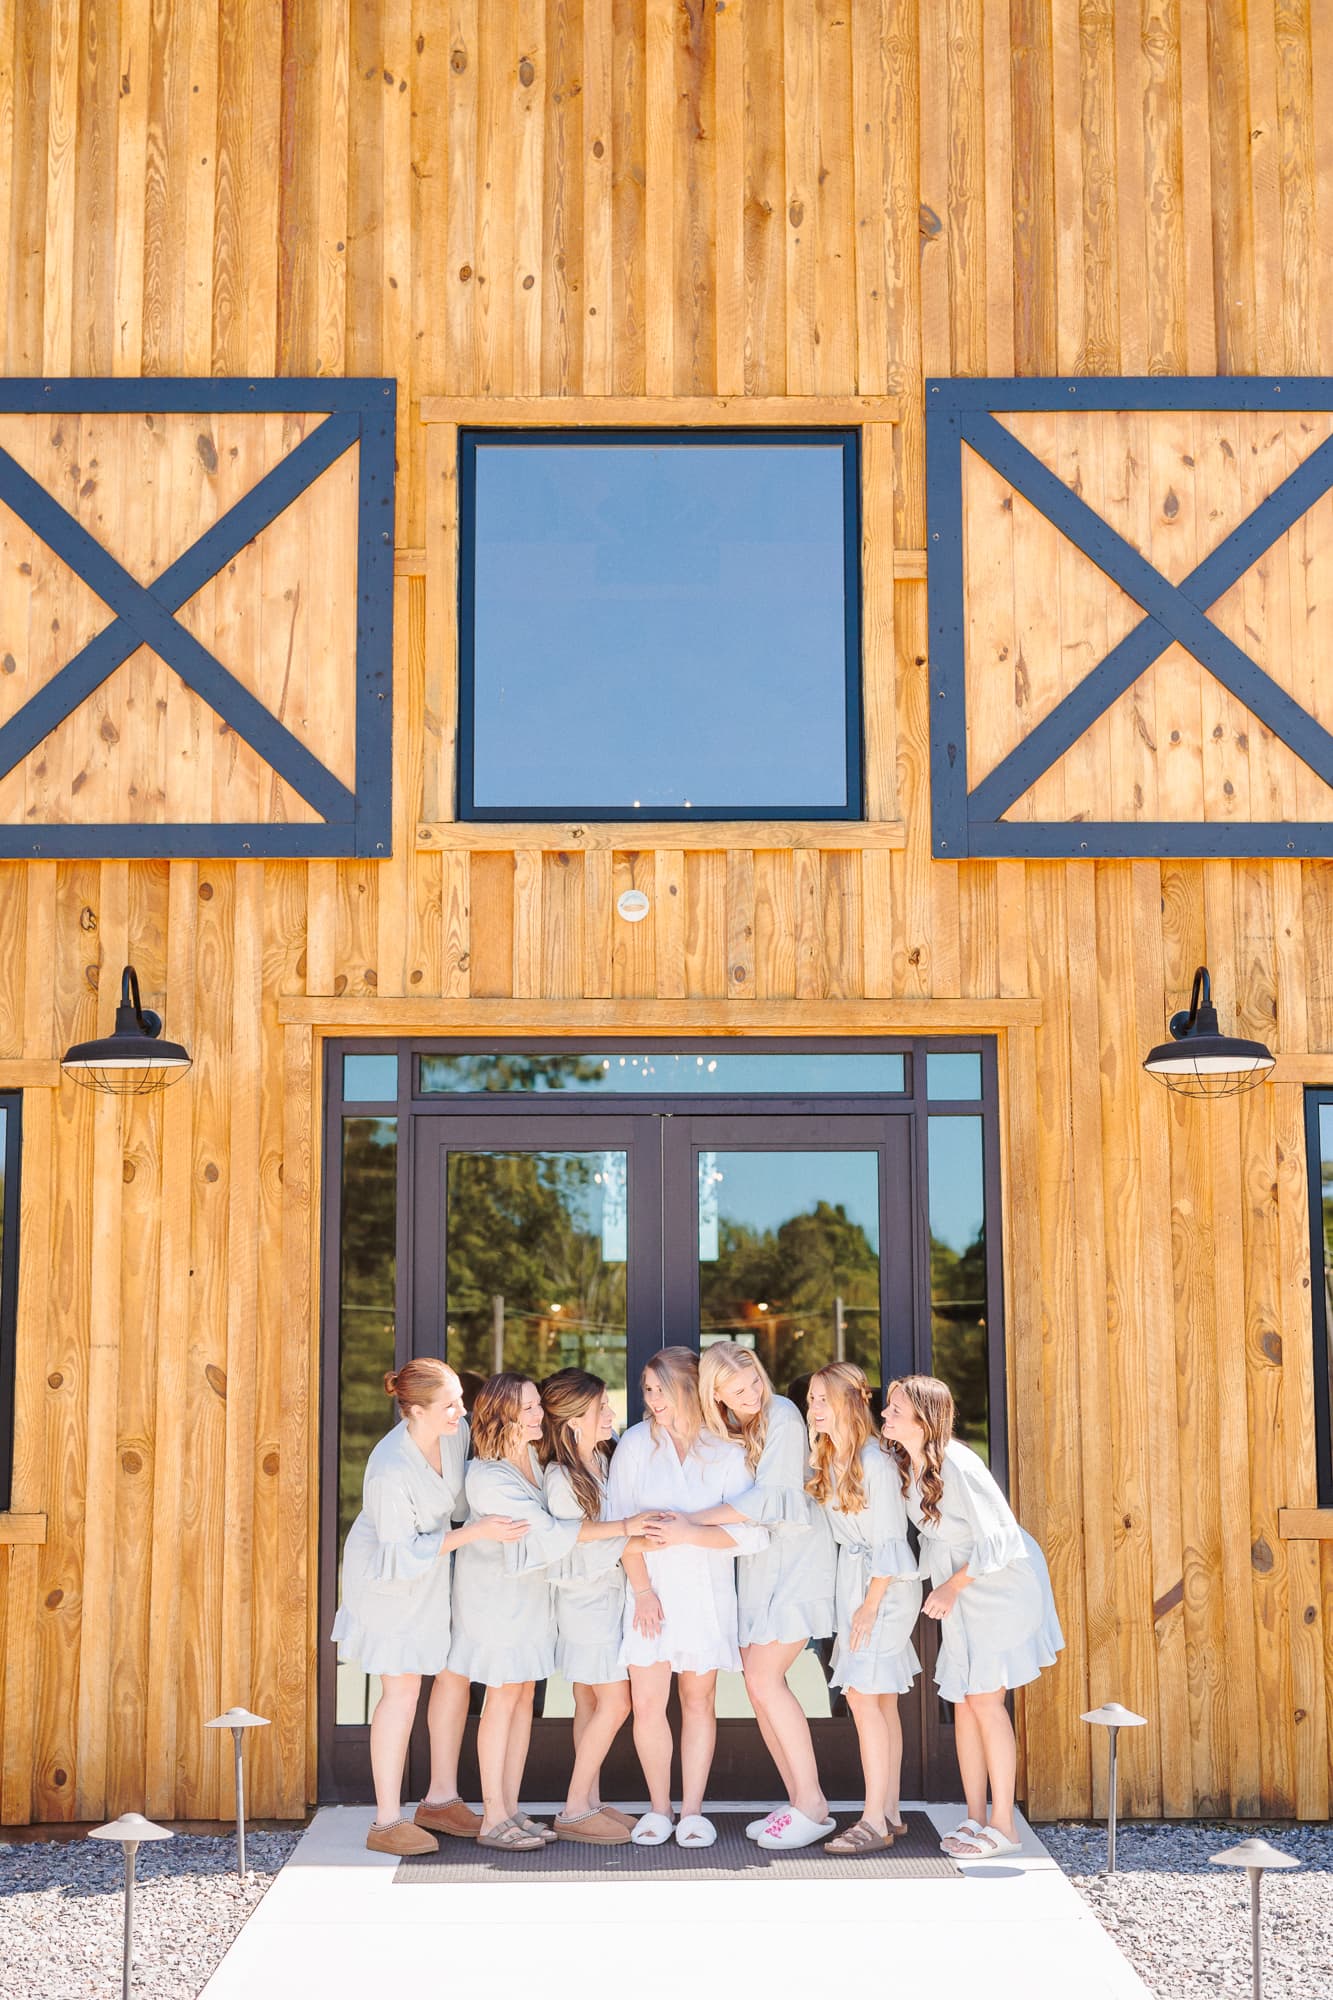 The bride and her bridesmaids stand in front of the barn wedding venue in their matching robes.